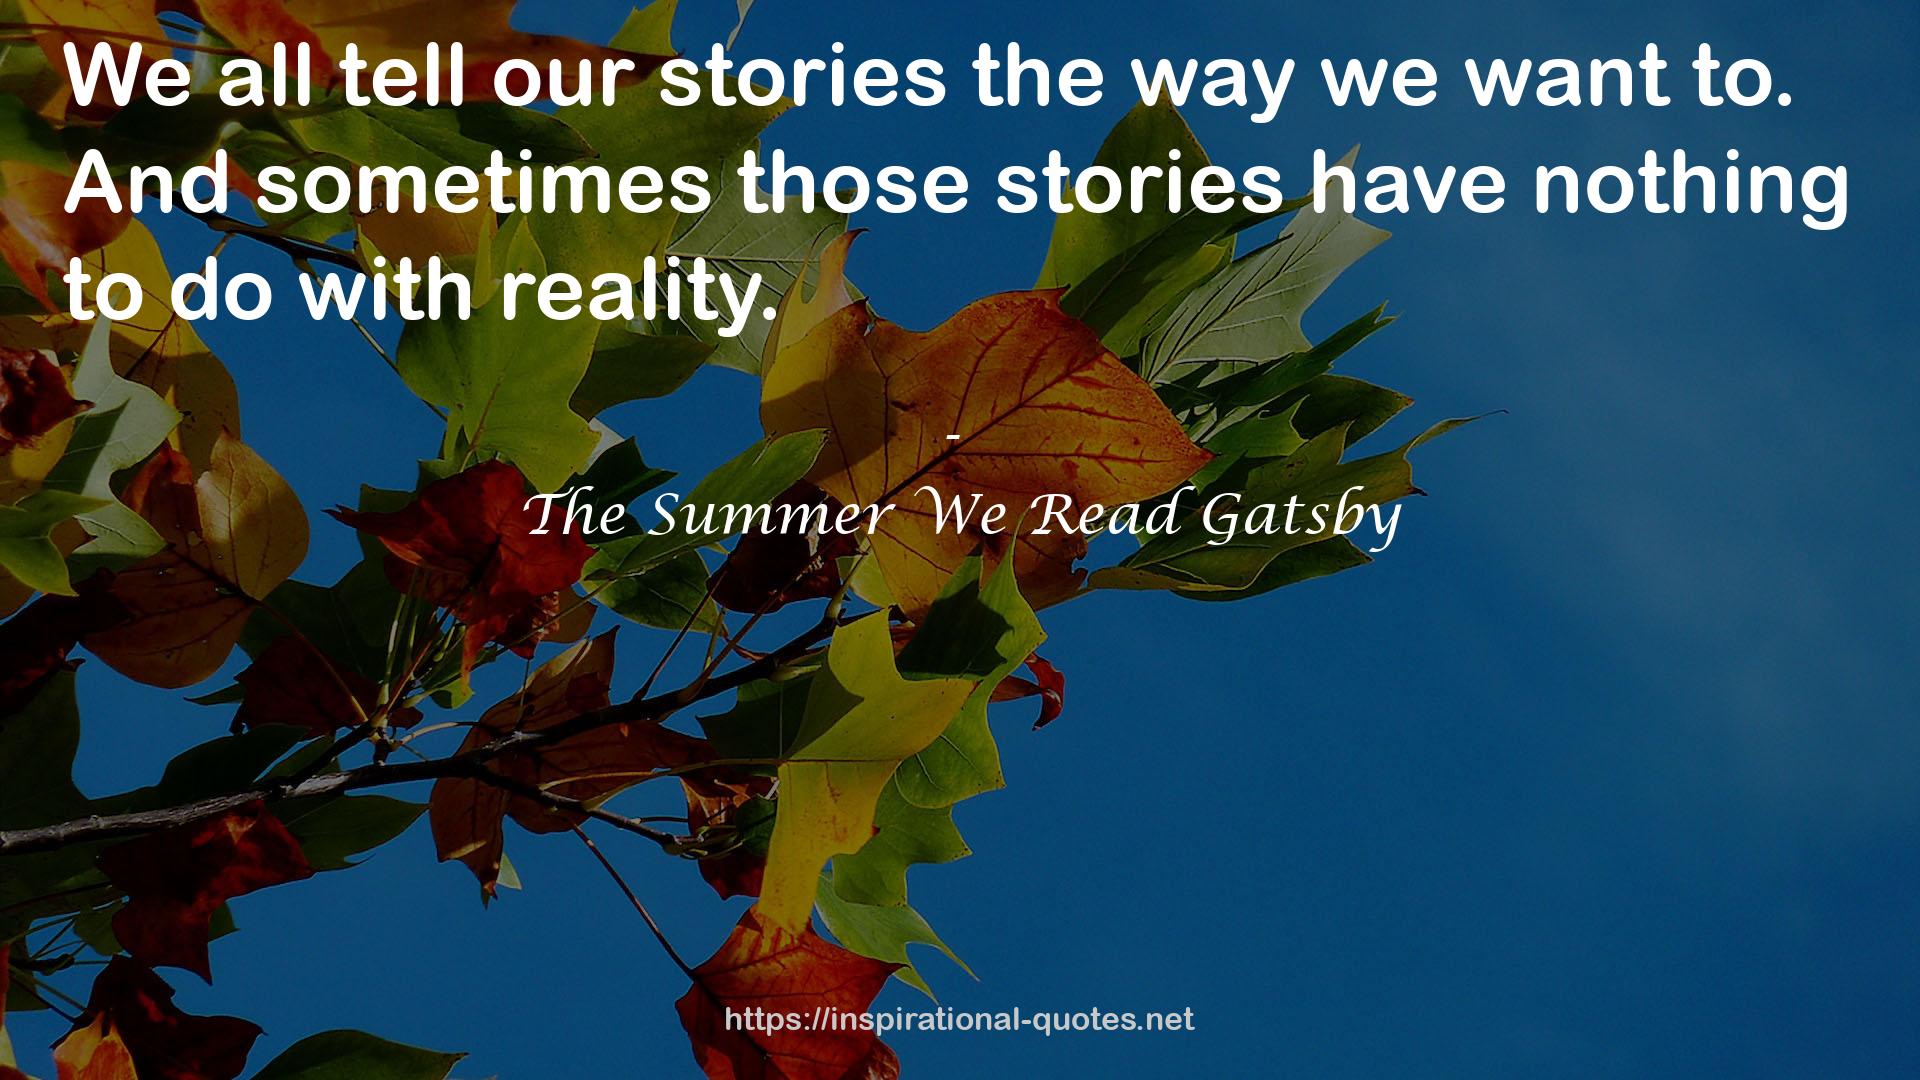 The Summer We Read Gatsby QUOTES